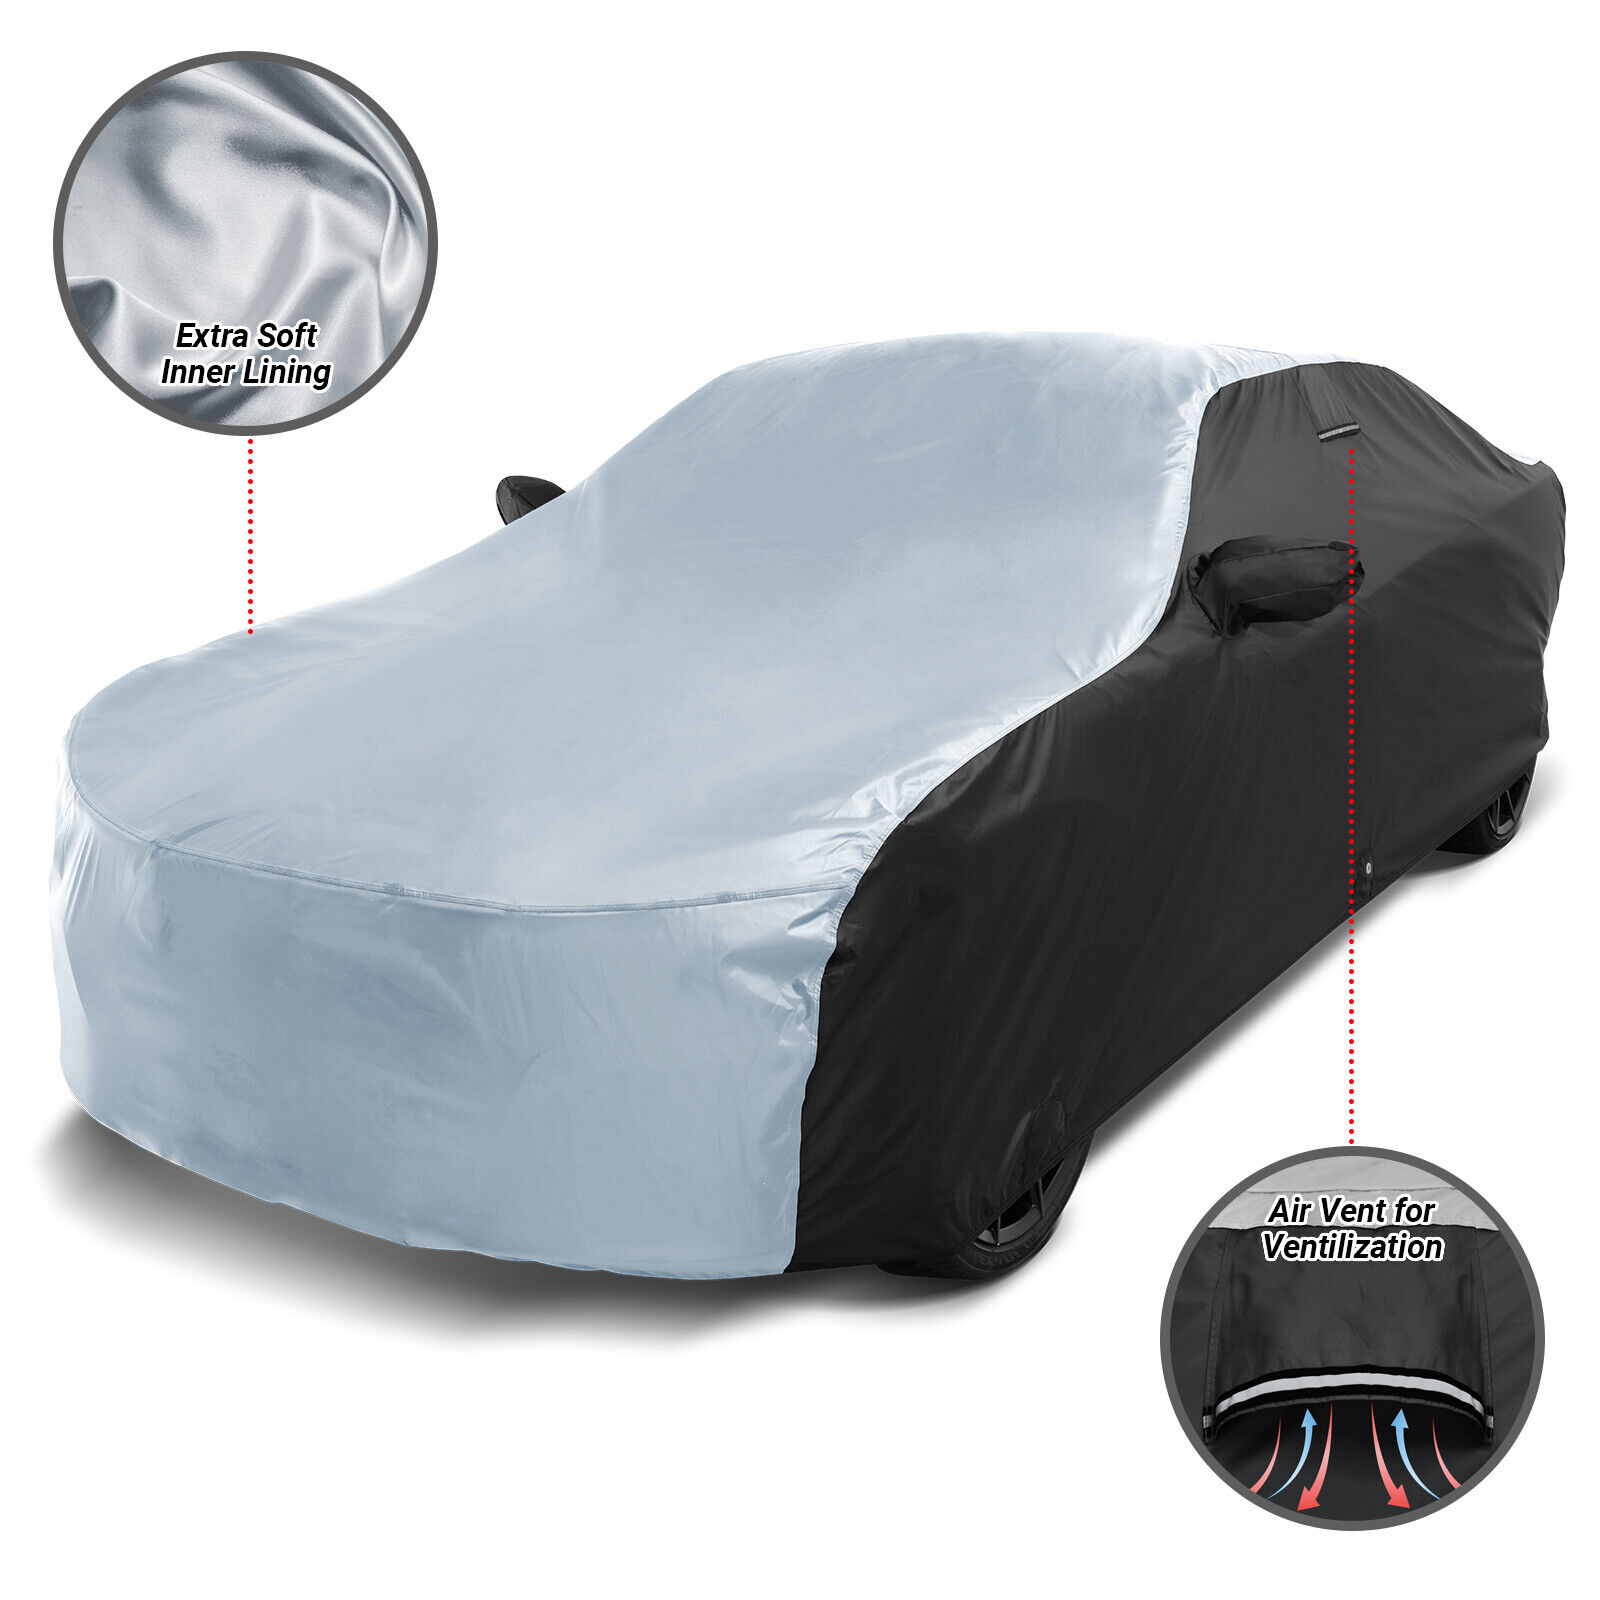 For LOTUS [EVORA] Custom-Fit Outdoor Waterproof All Weather Best Car Cover